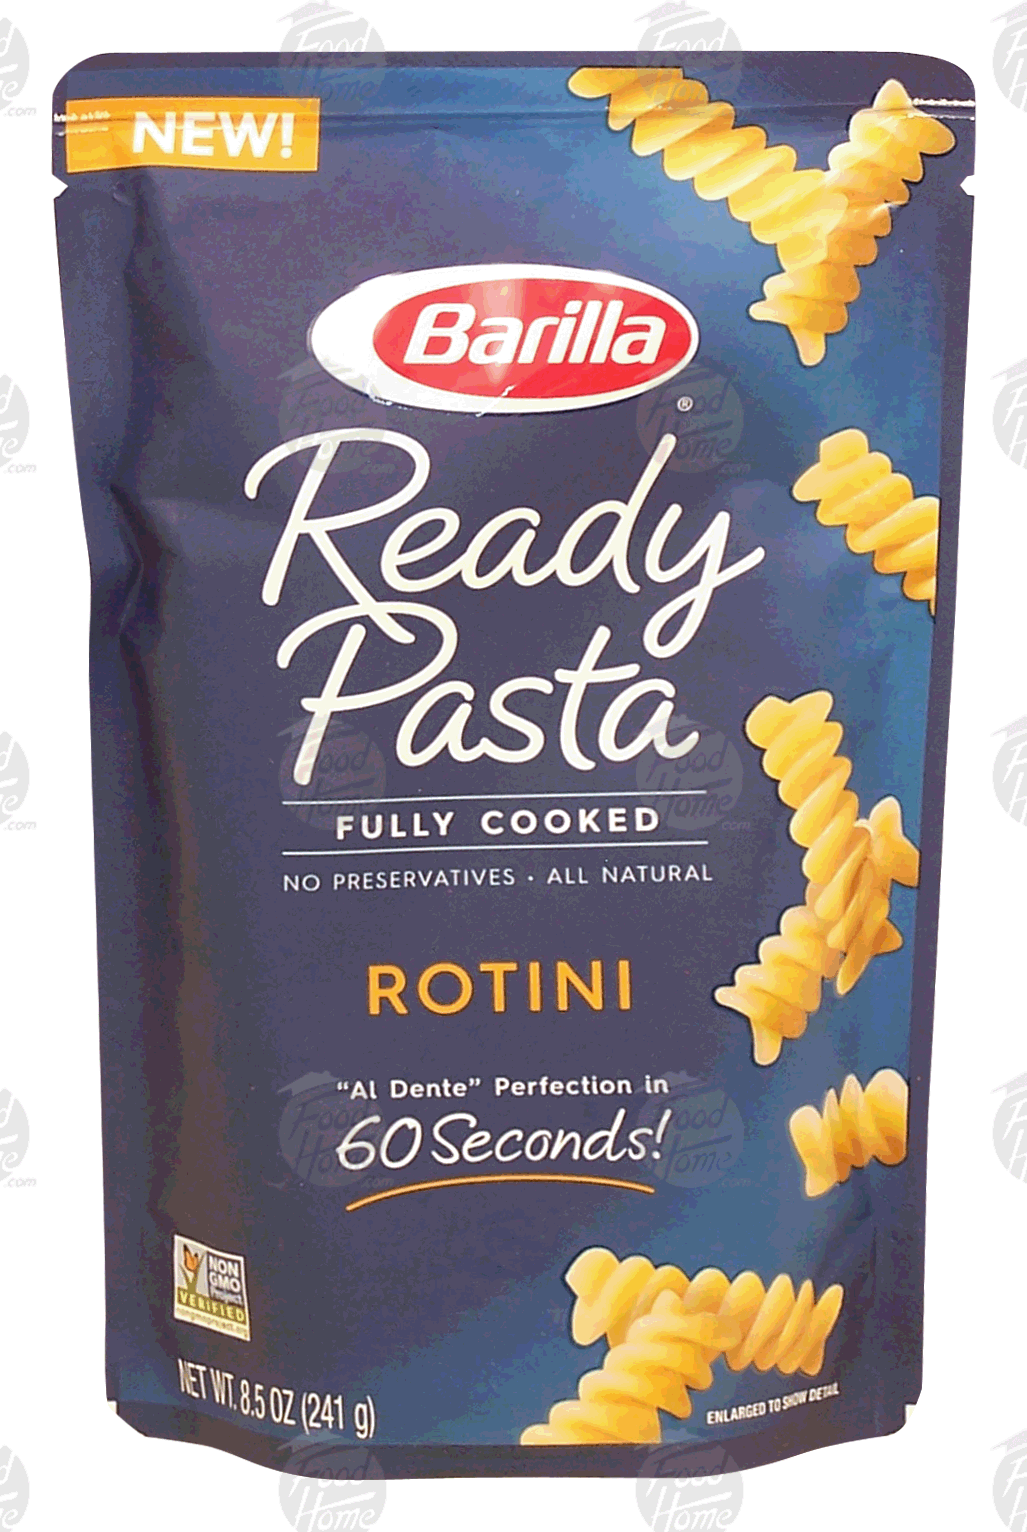 Barilla Ready Pasta rotini, fully cooked Full-Size Picture